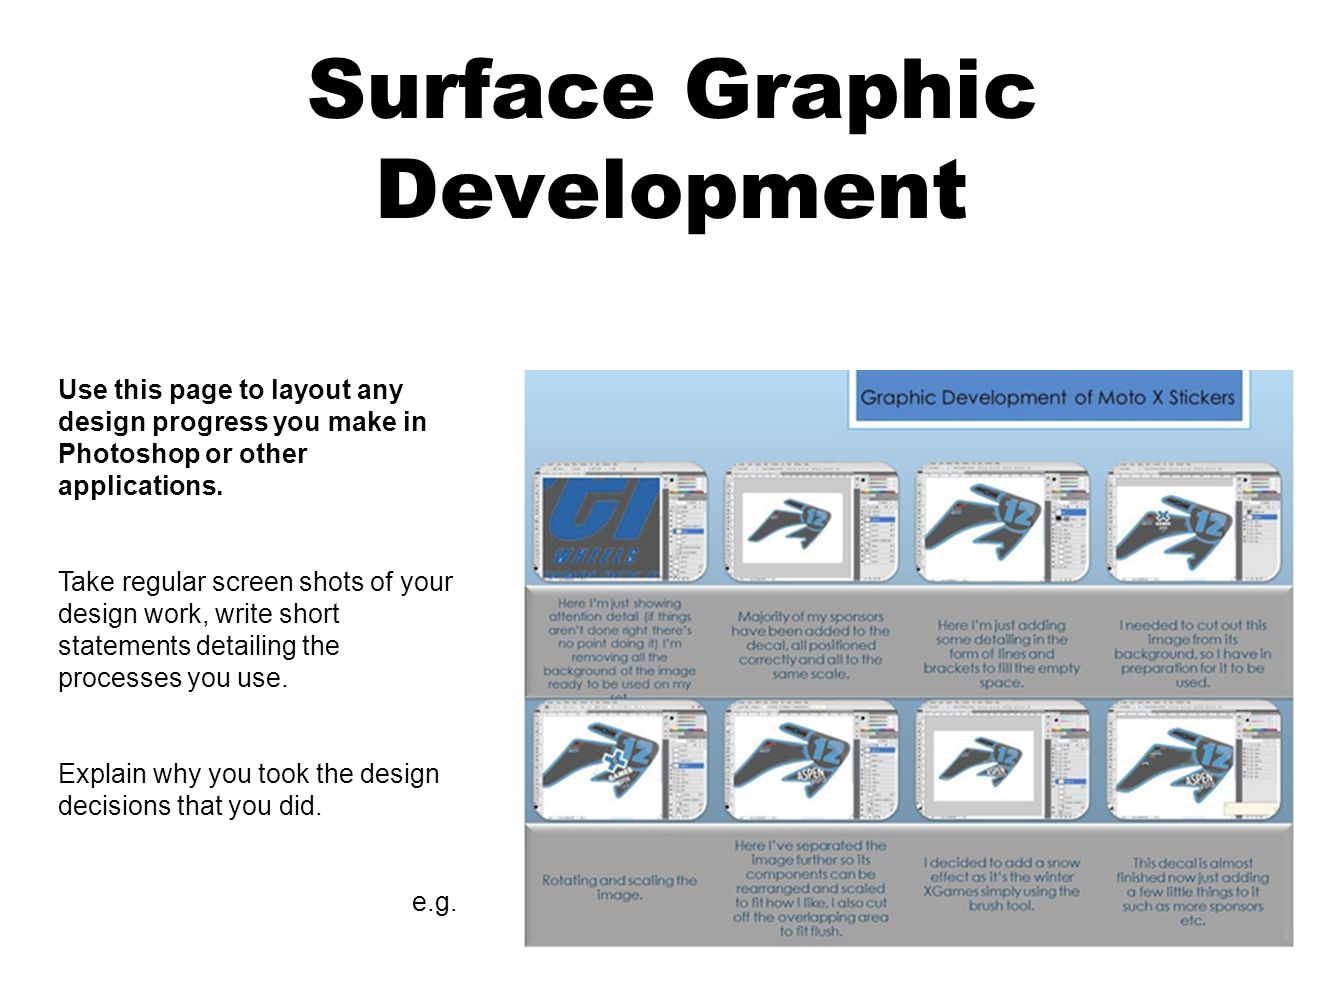 Surface Graphic Development Use this page to layout any design progress you make in Photoshop or other applications.